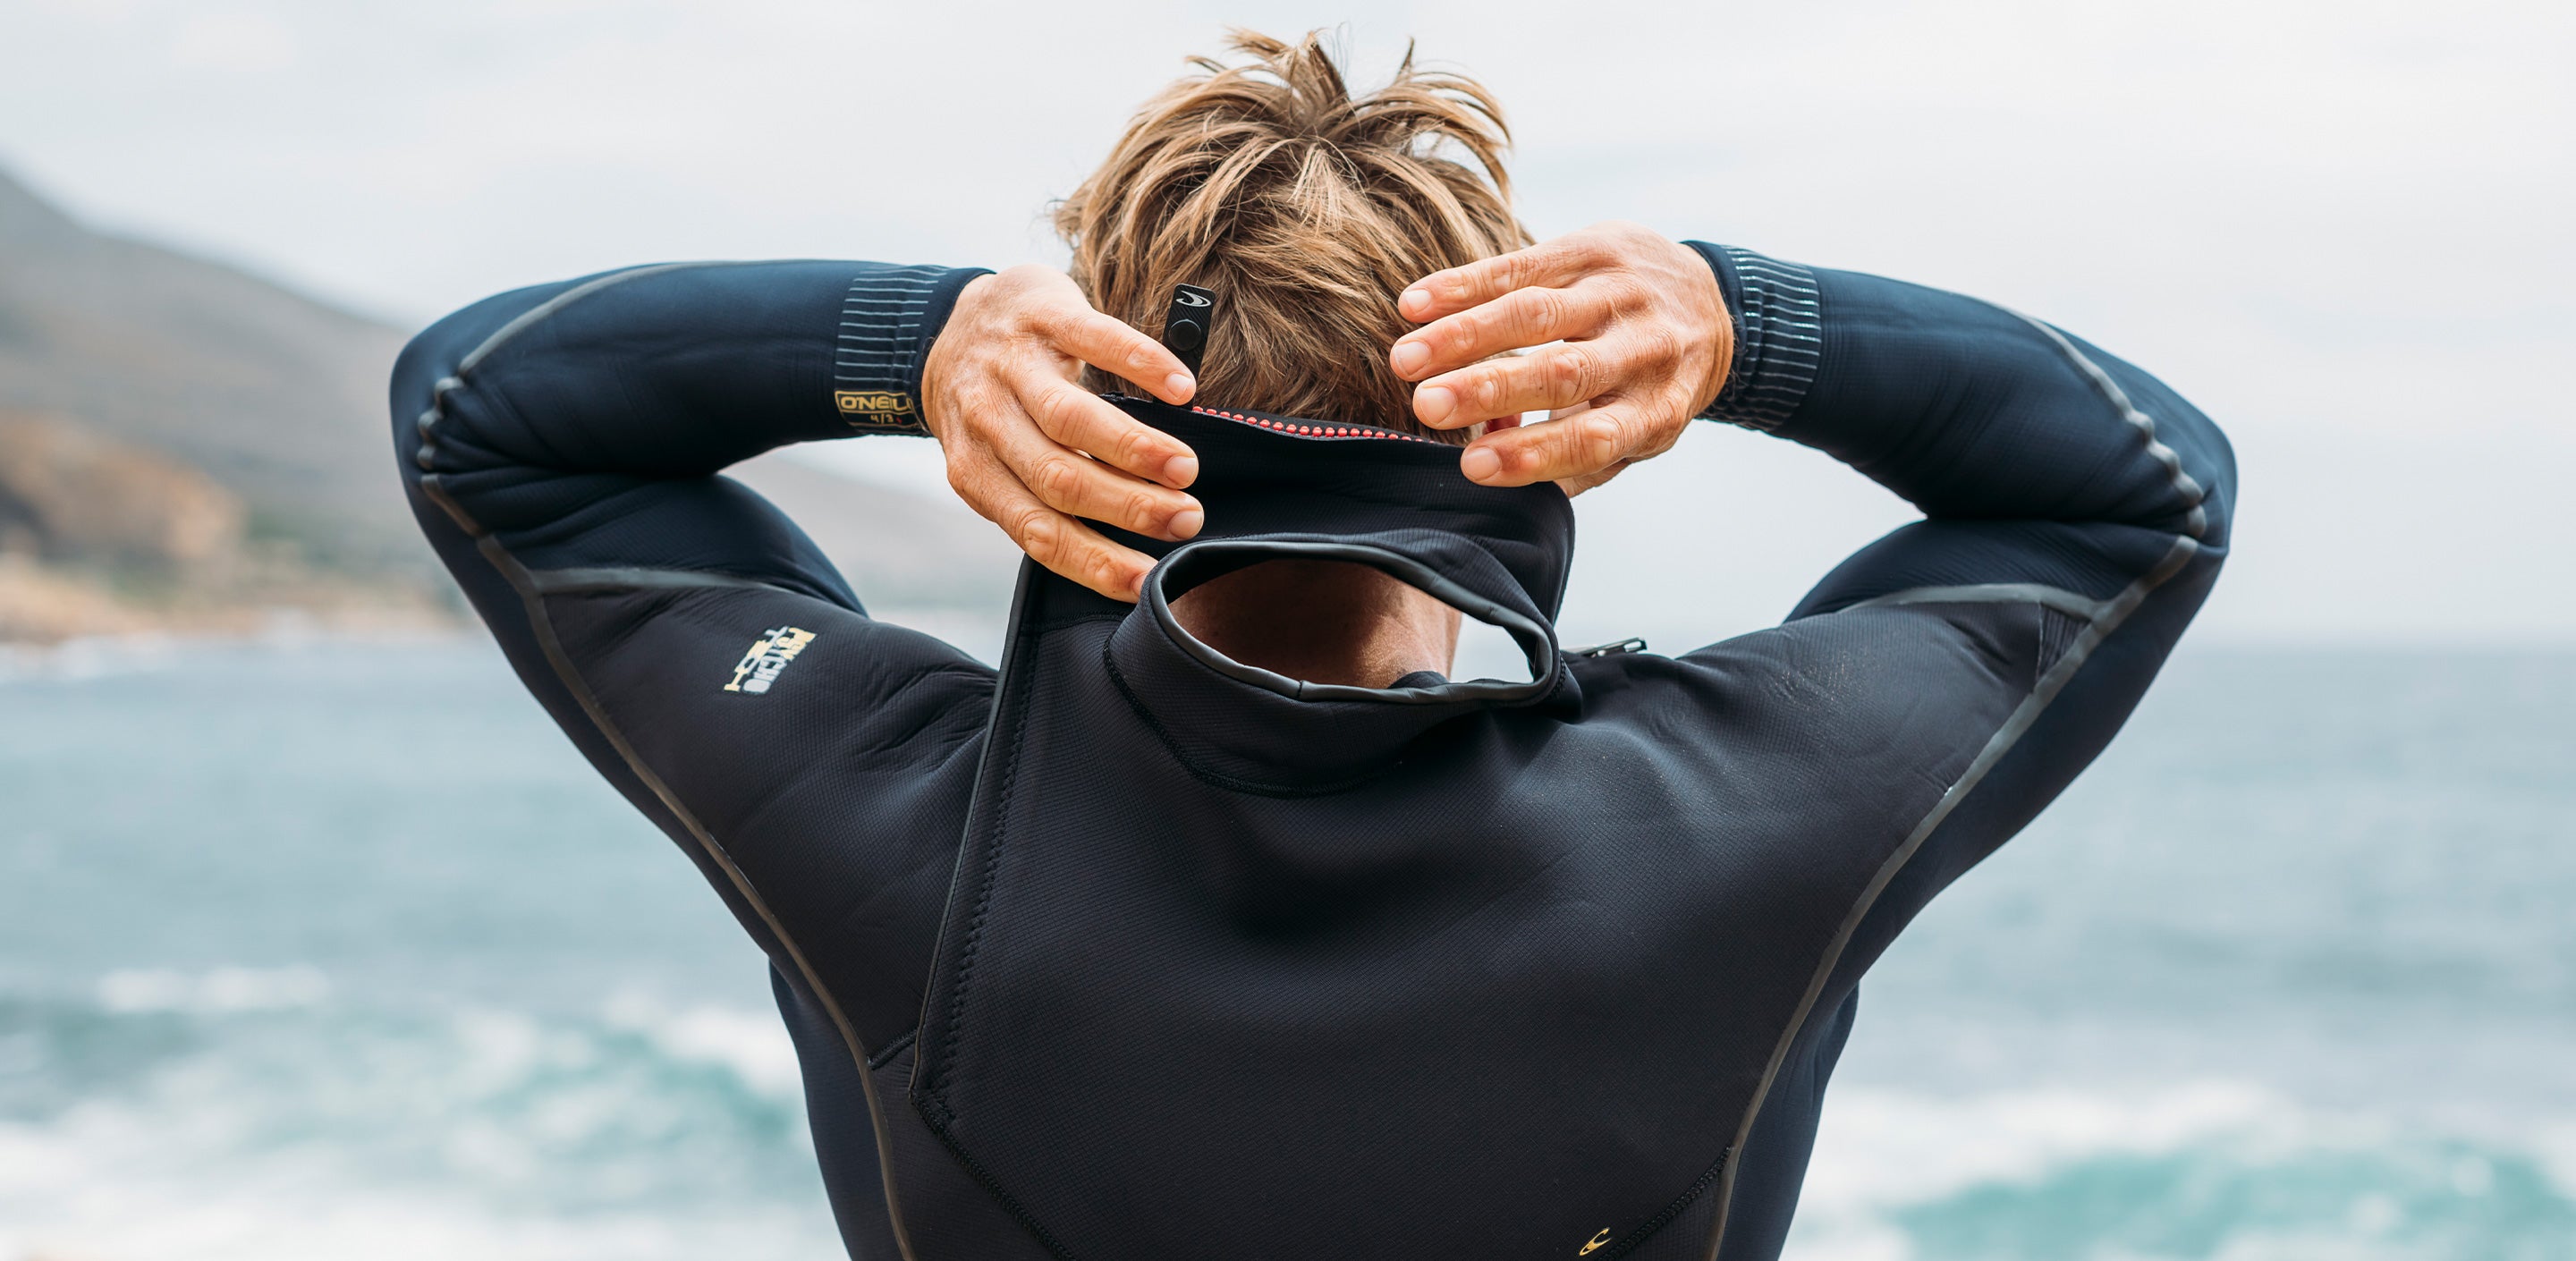 How tight should a wetsuit be and will a wetsuit stretch? - 220 Triathlon